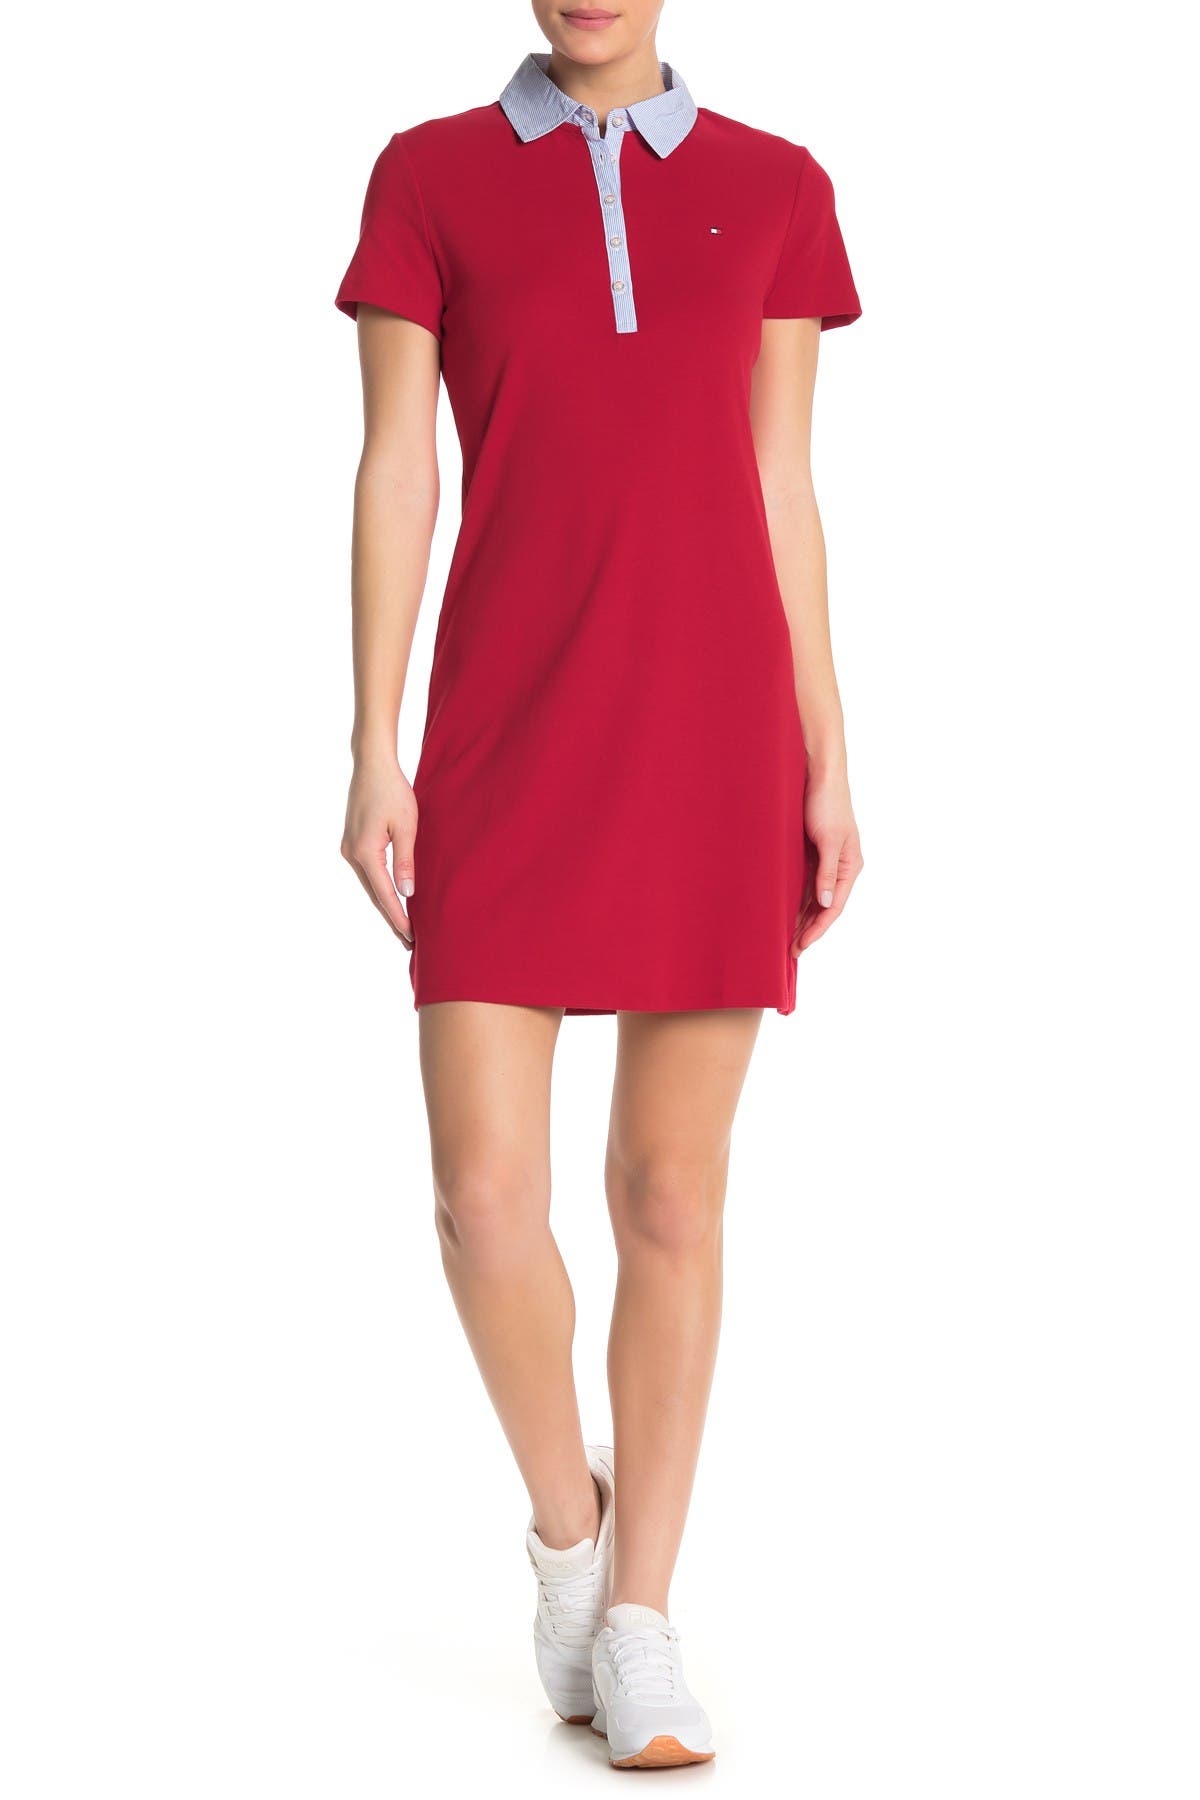 tommy hilfiger red polo dress